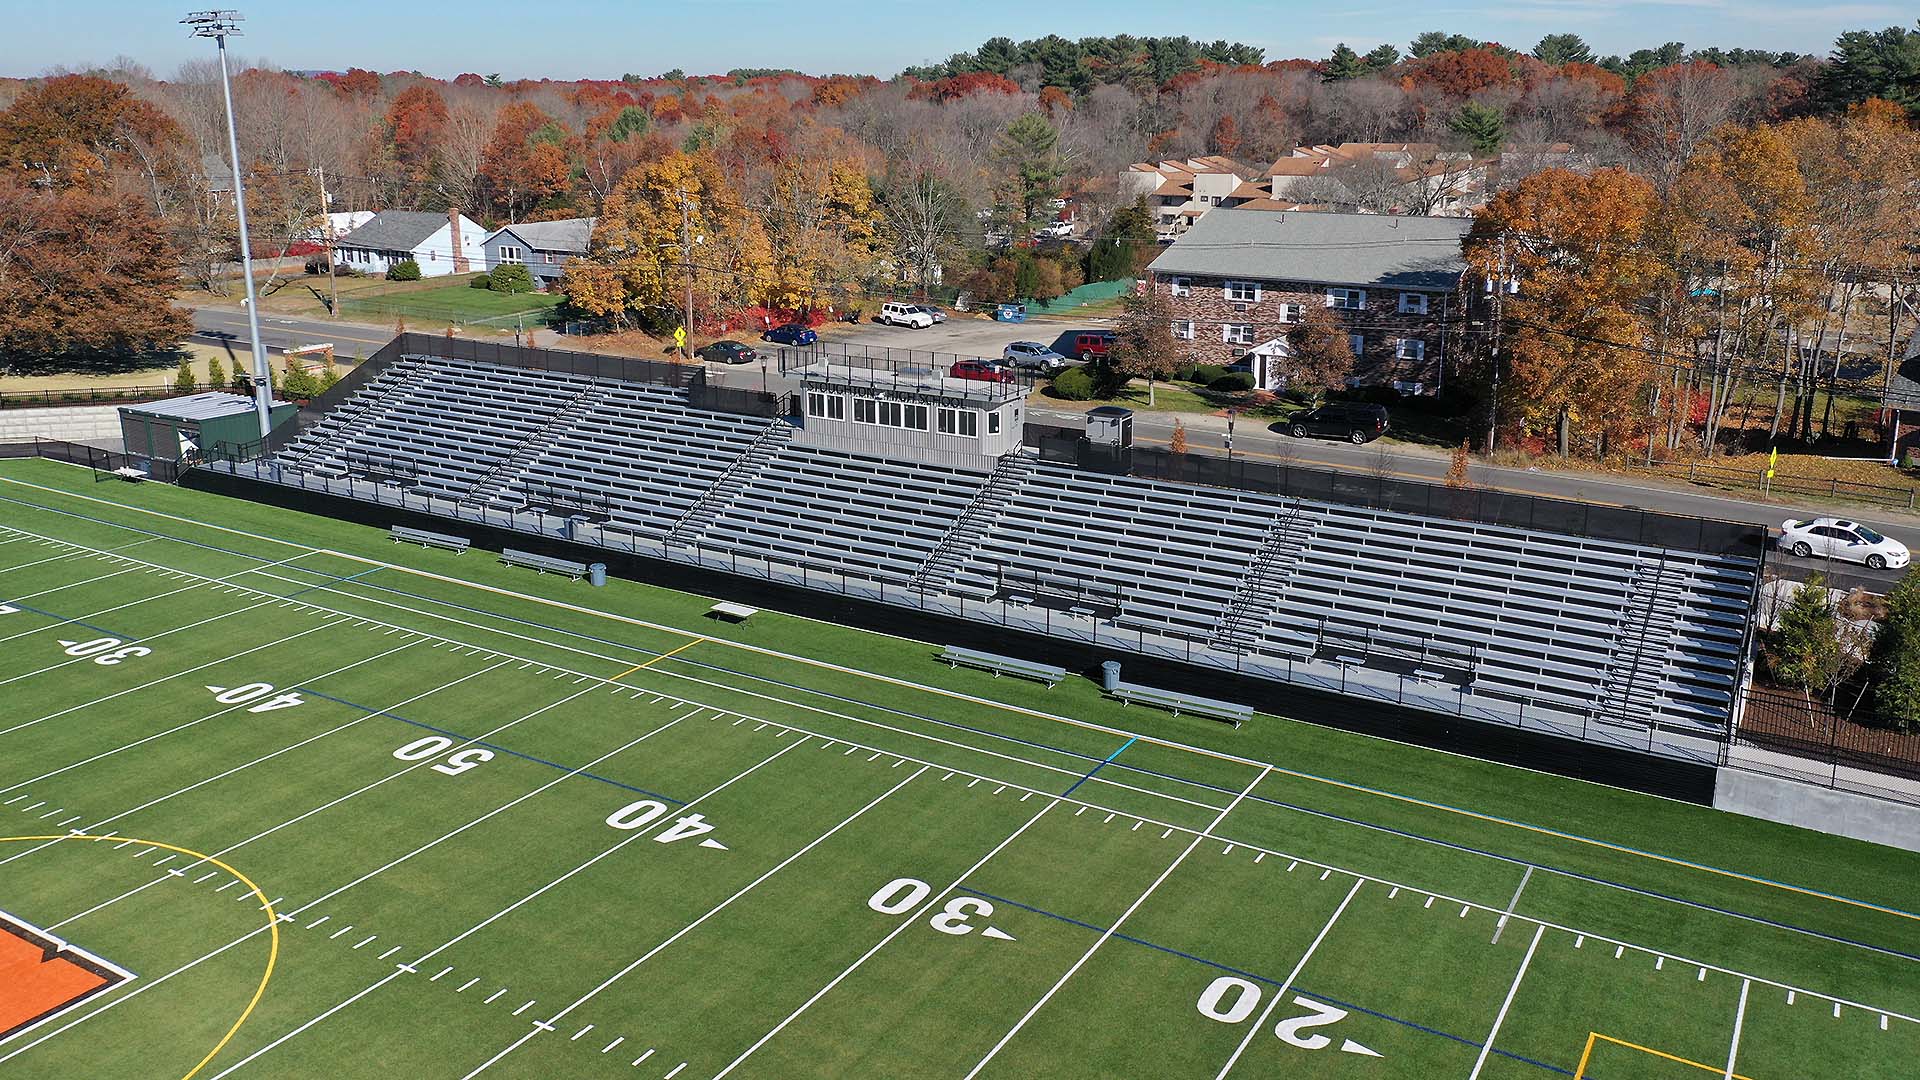 Grandstand and press box for football stadium in Stoughton, MA